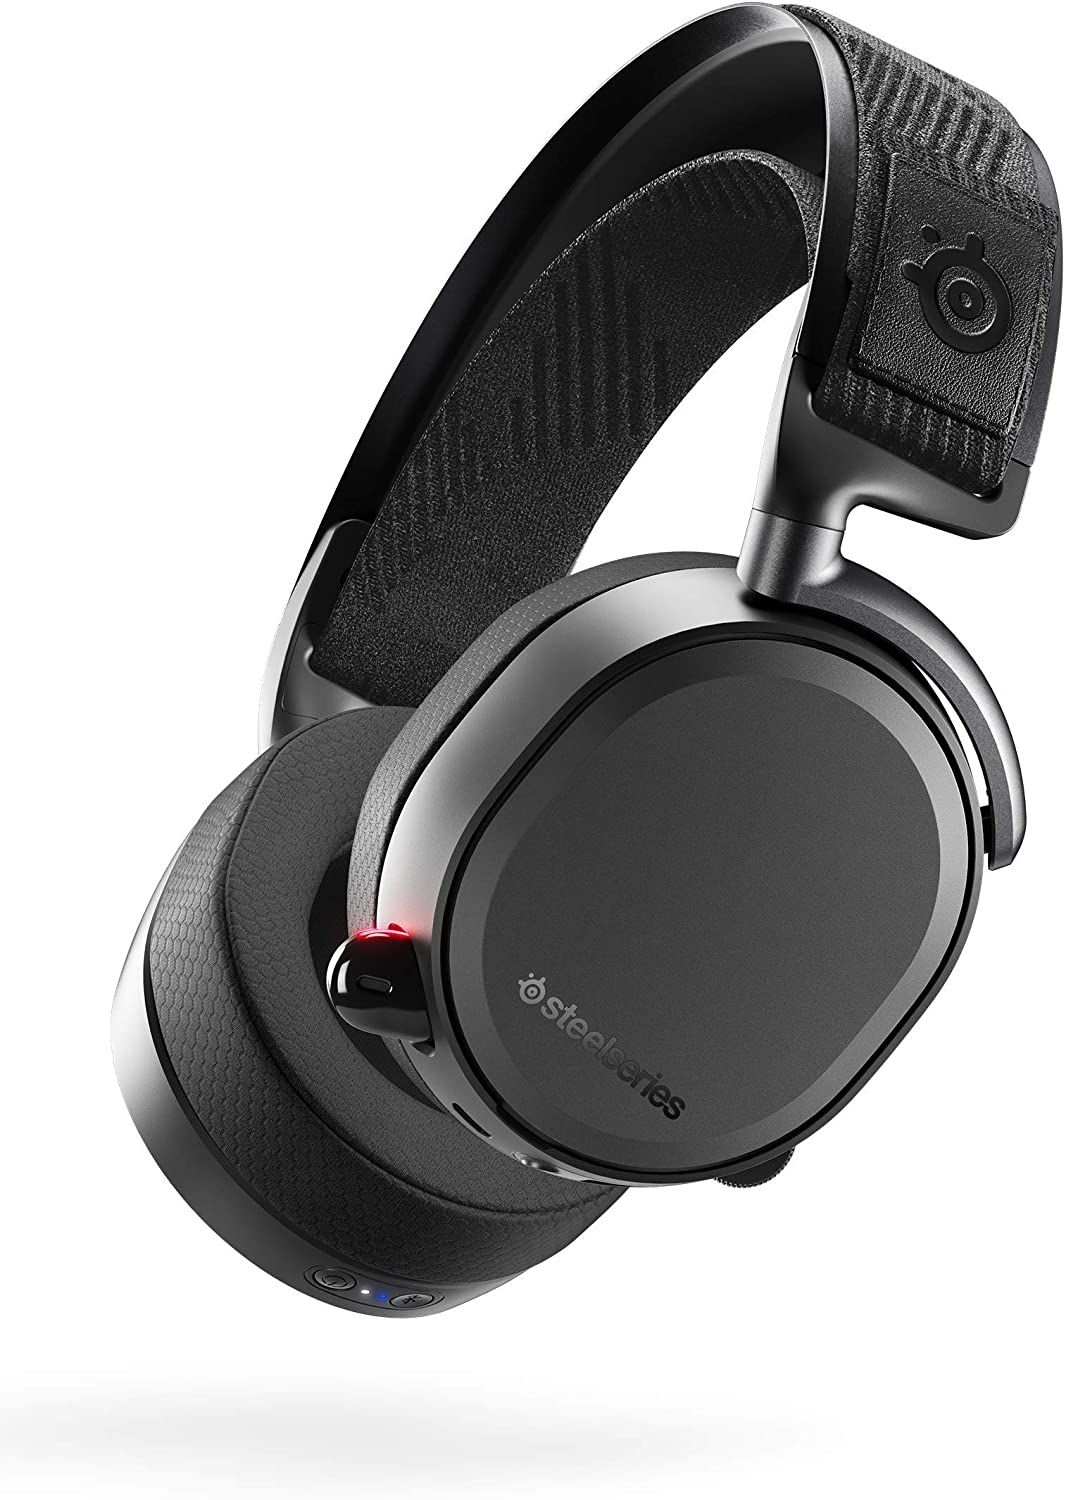 The 7 Best Wireless Gaming Headsets